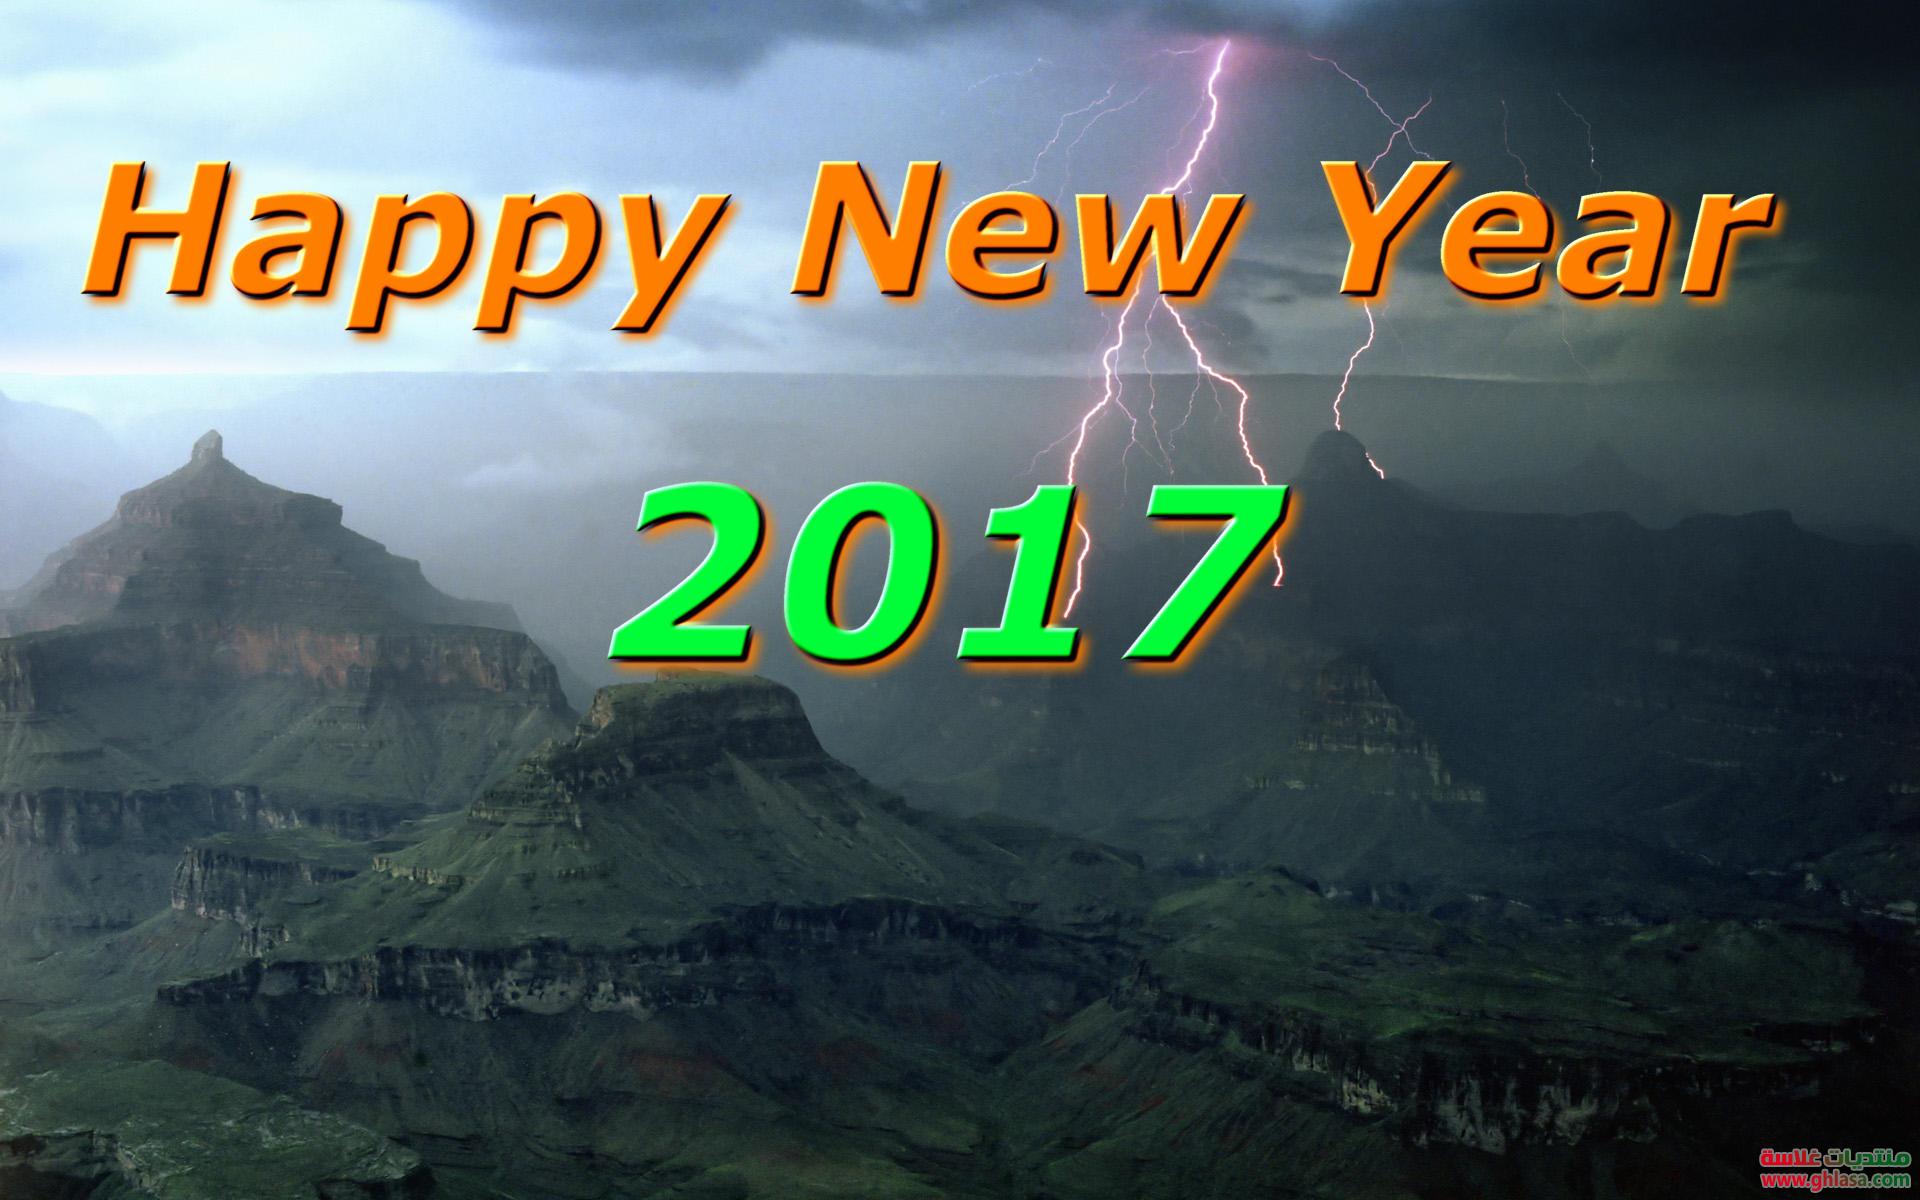   2024 / 2025 ,     2024 / 2025 , happy new year2024 / 2025 do.php?img=66843